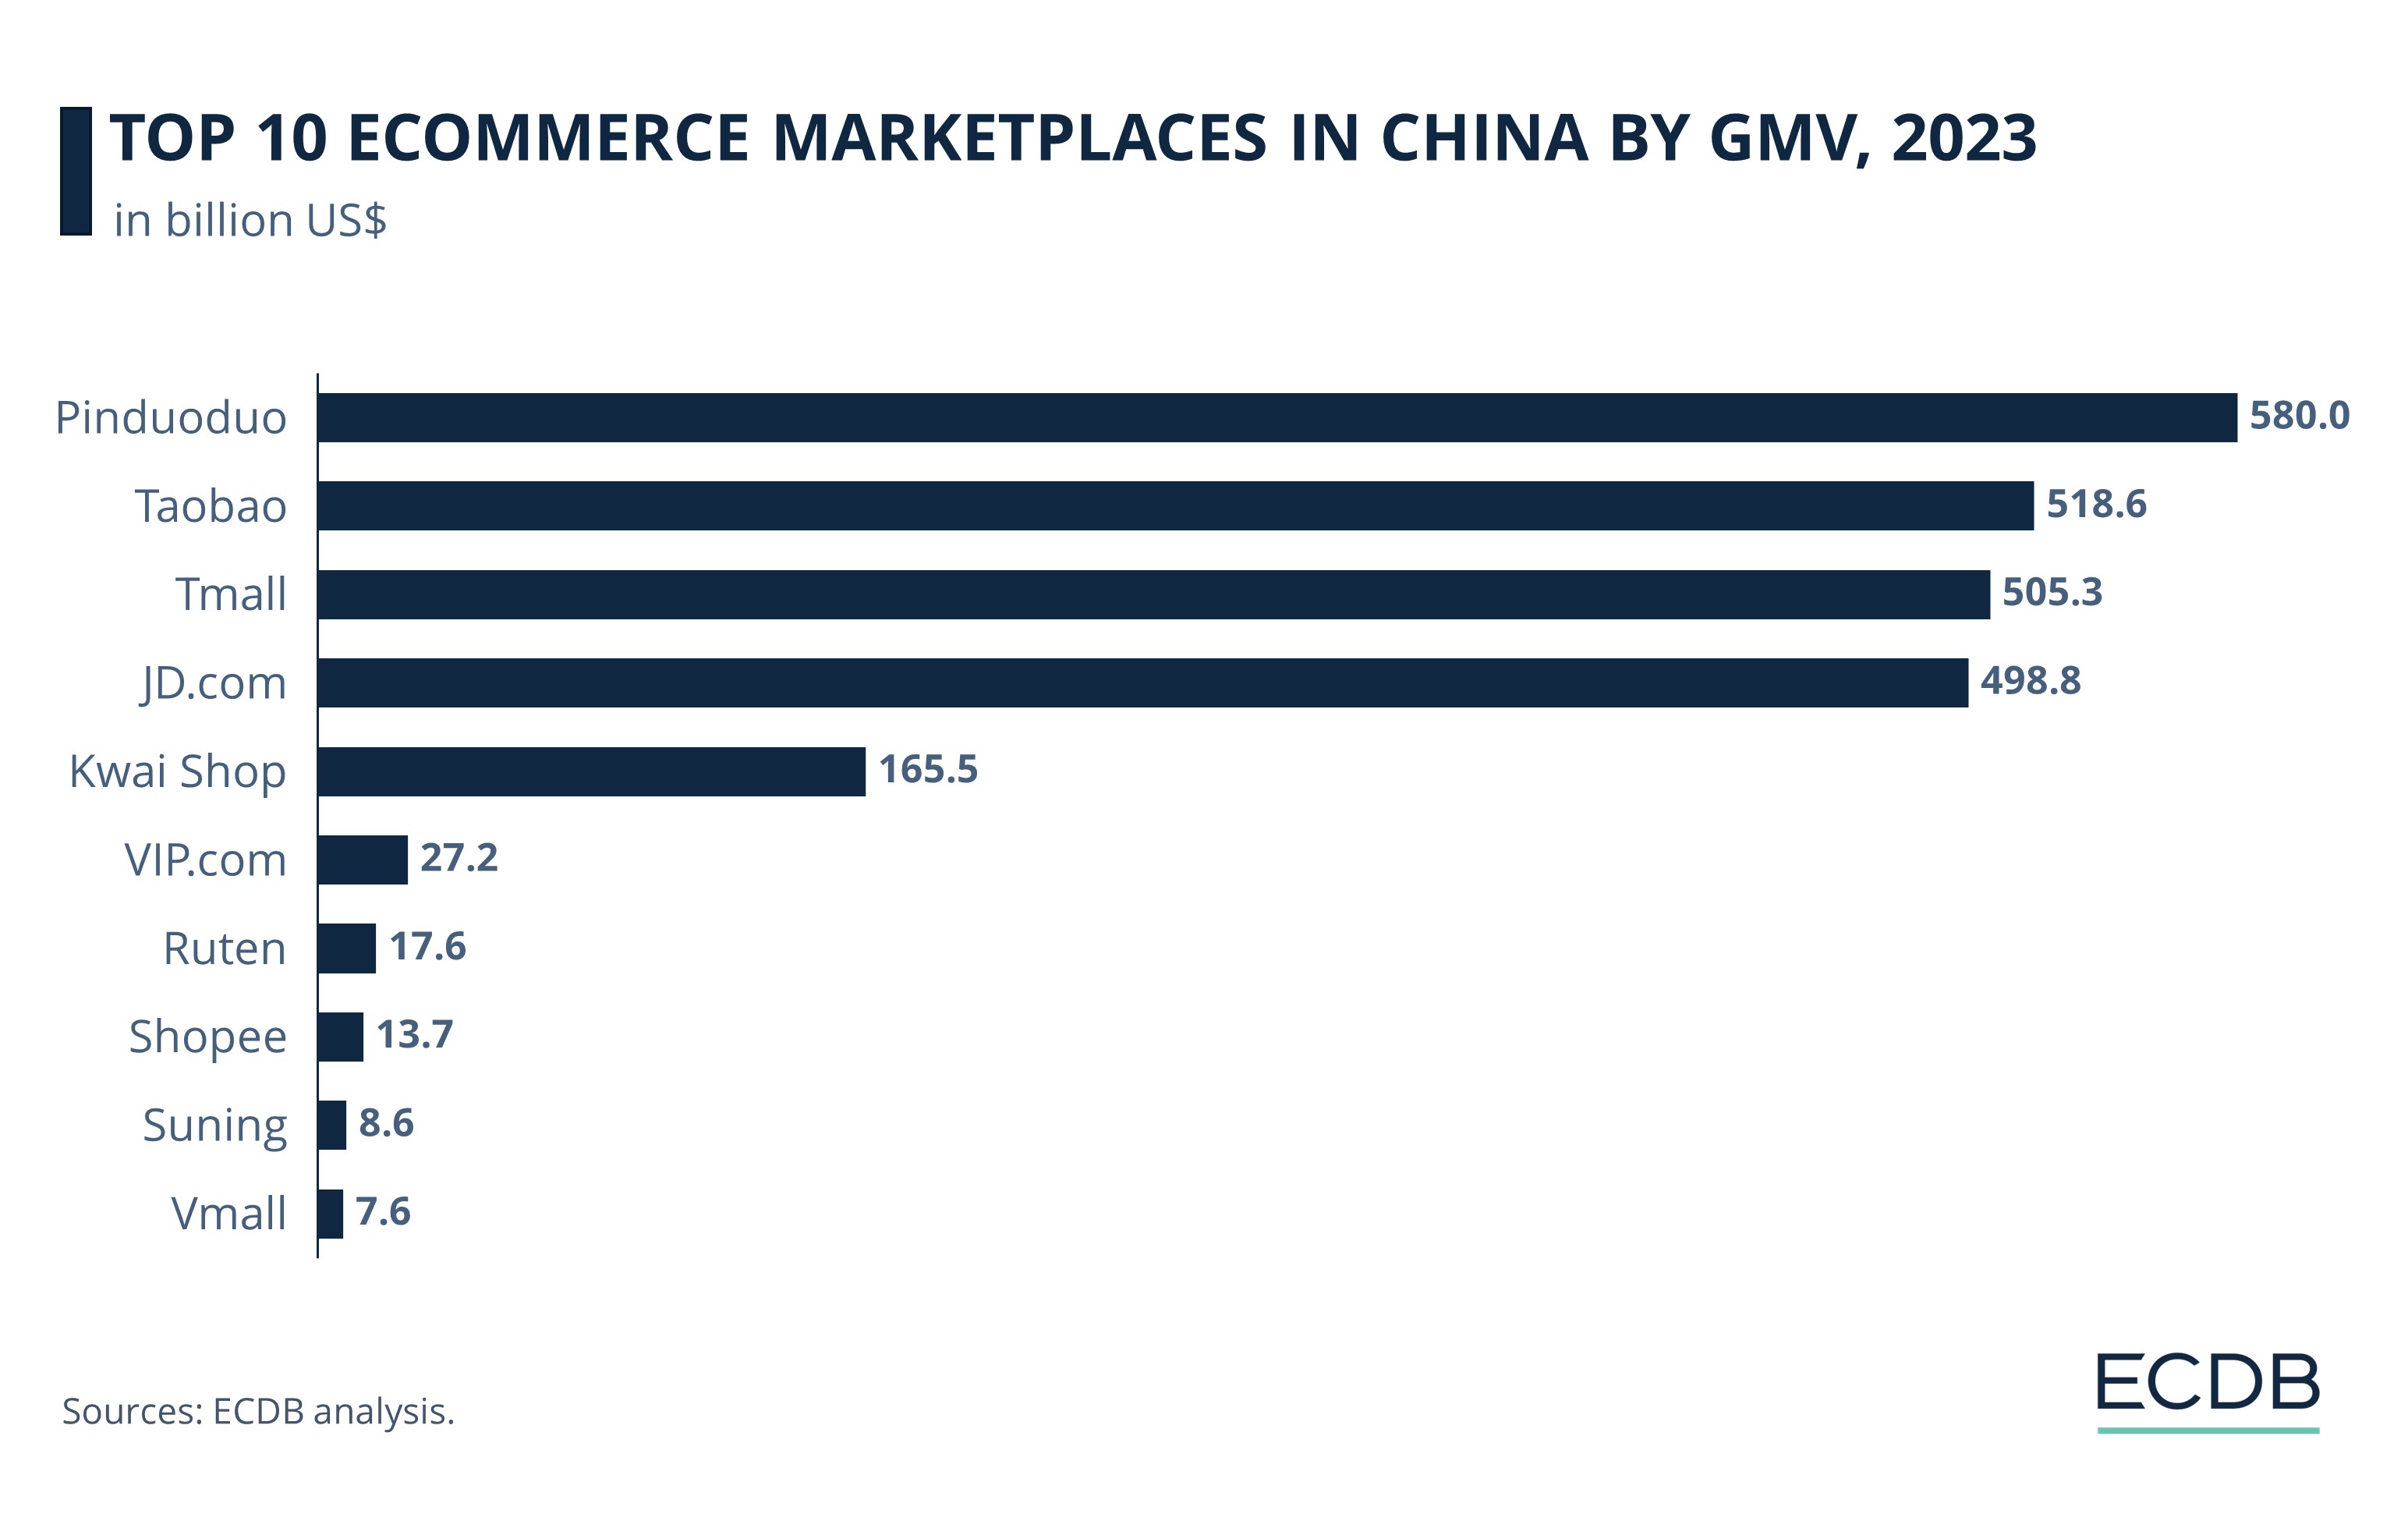 Top 10 Ecommerce Marketplaces in China by GMV, 2023